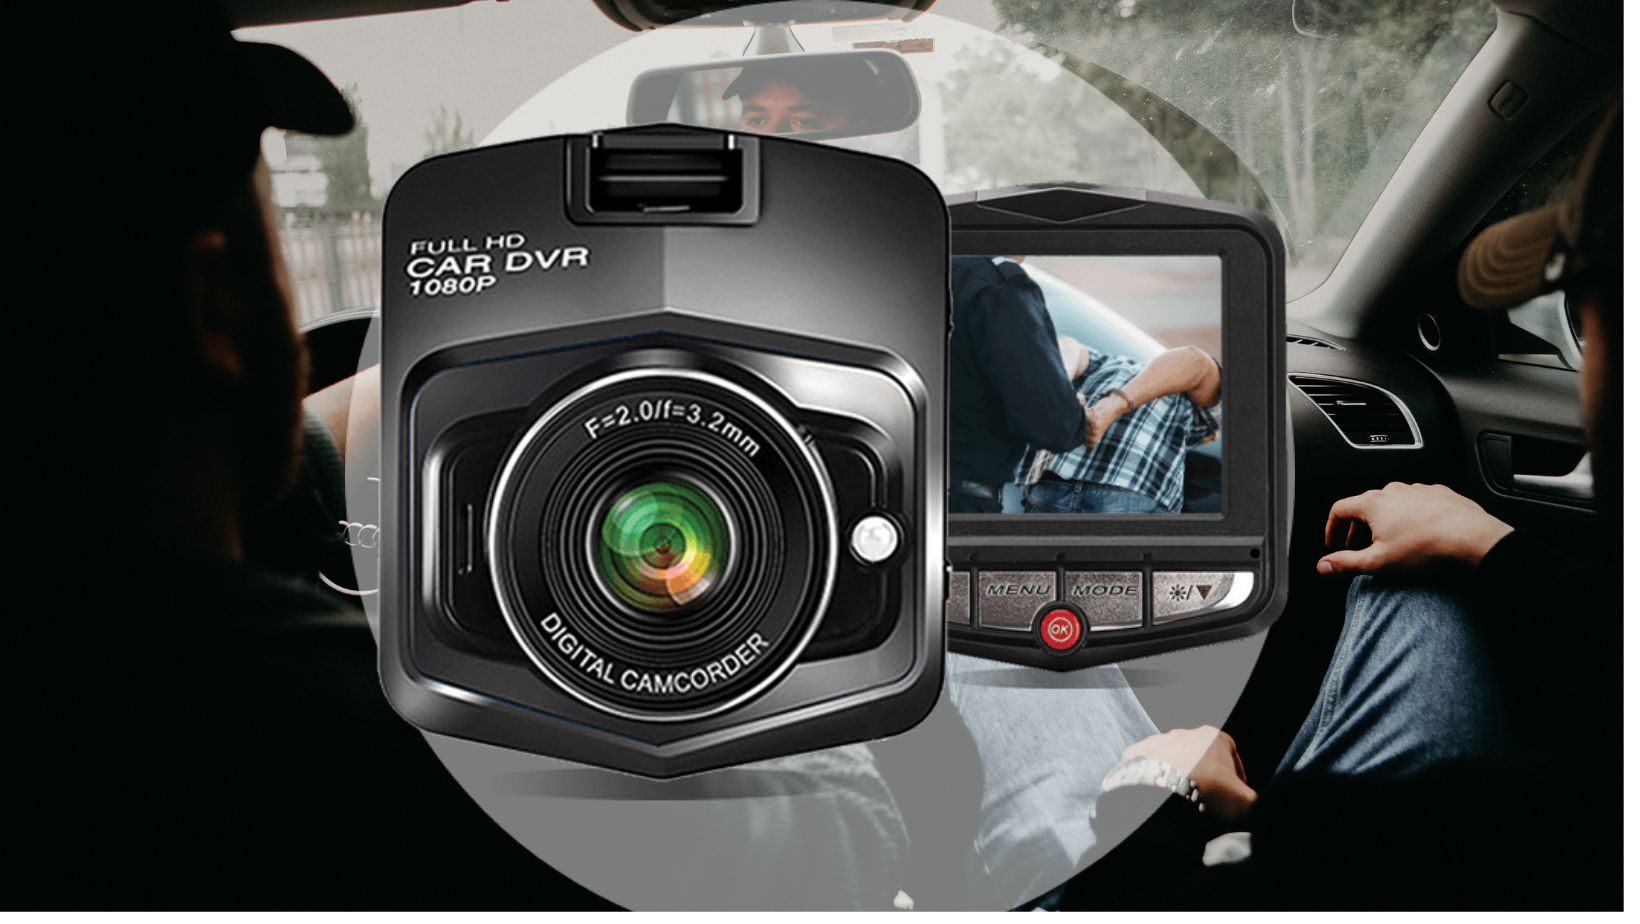 Tactical Shield Capture Every Journey Safely with Autovision DashCam